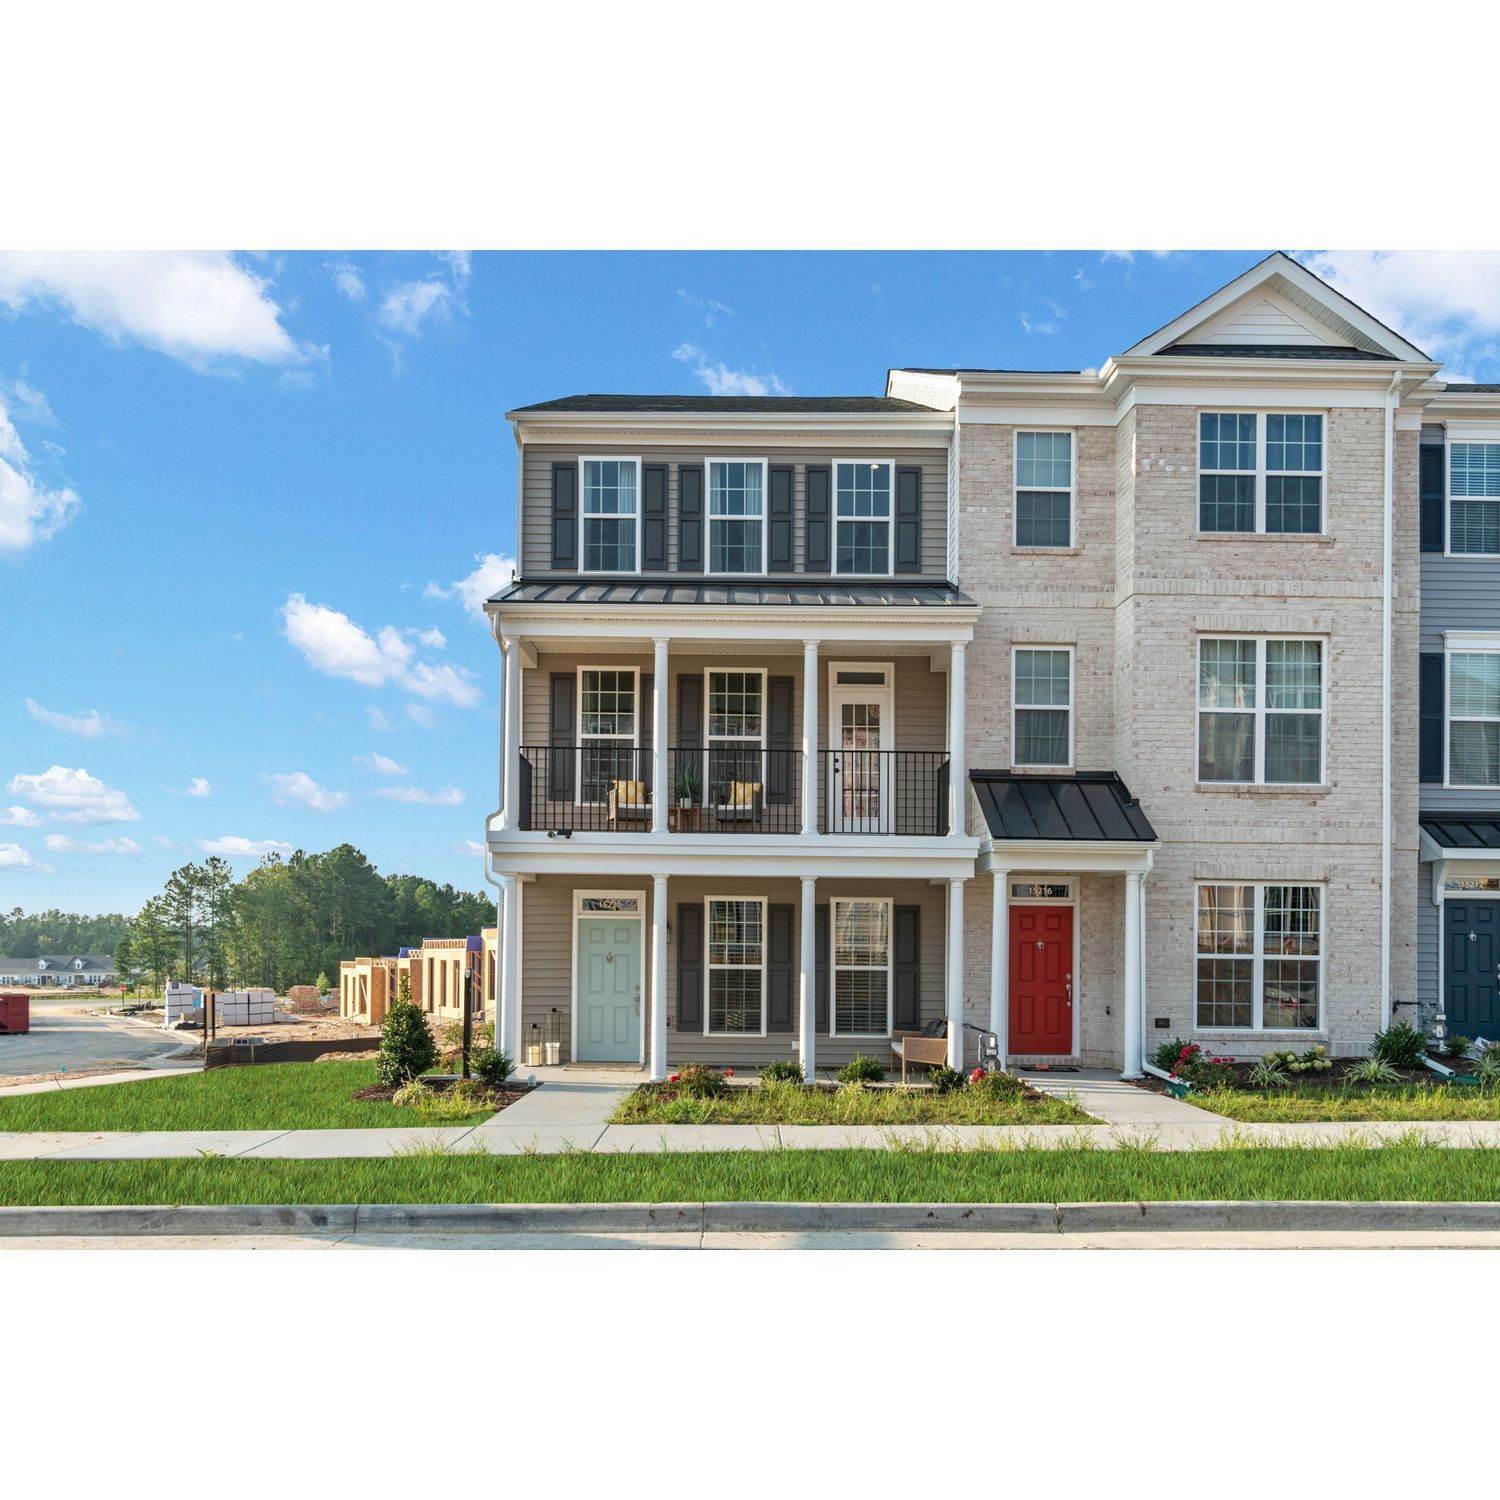 3. Cosby Village 3-Story Townhomes xây dựng tại 15220 Dunton Avenue, Chesterfield, VA 23832